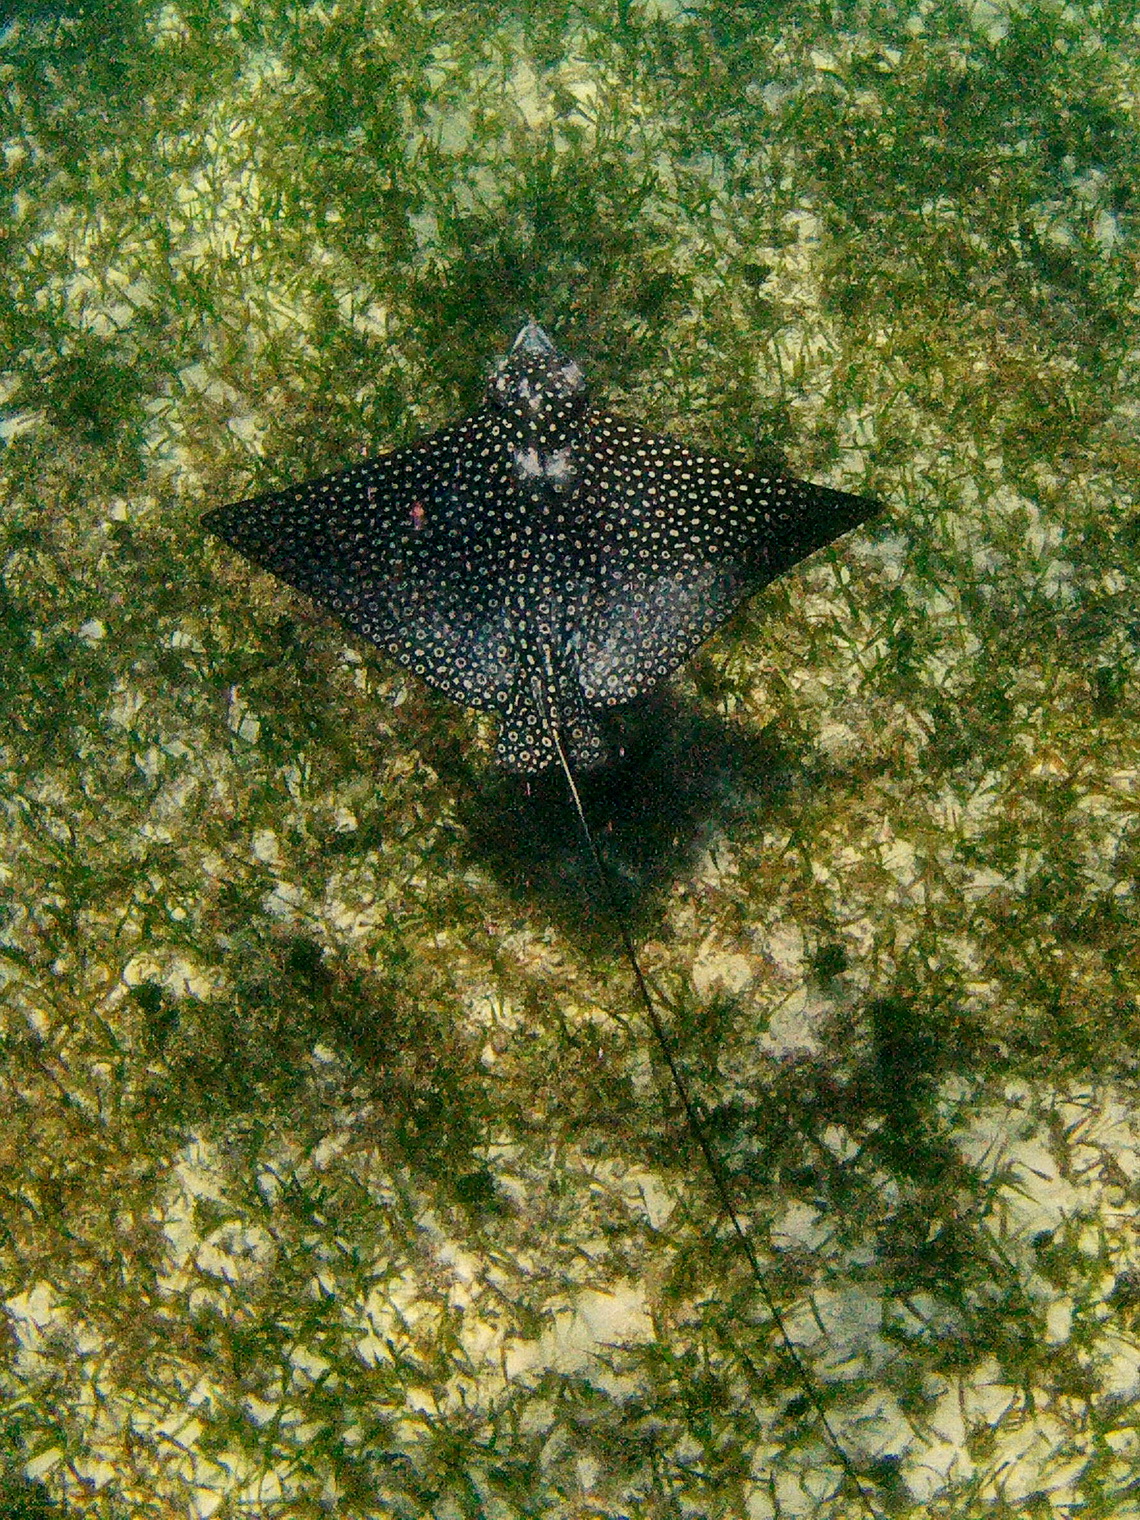 Spotted Eagle Ray in the shallow water of Sargeant's Caye